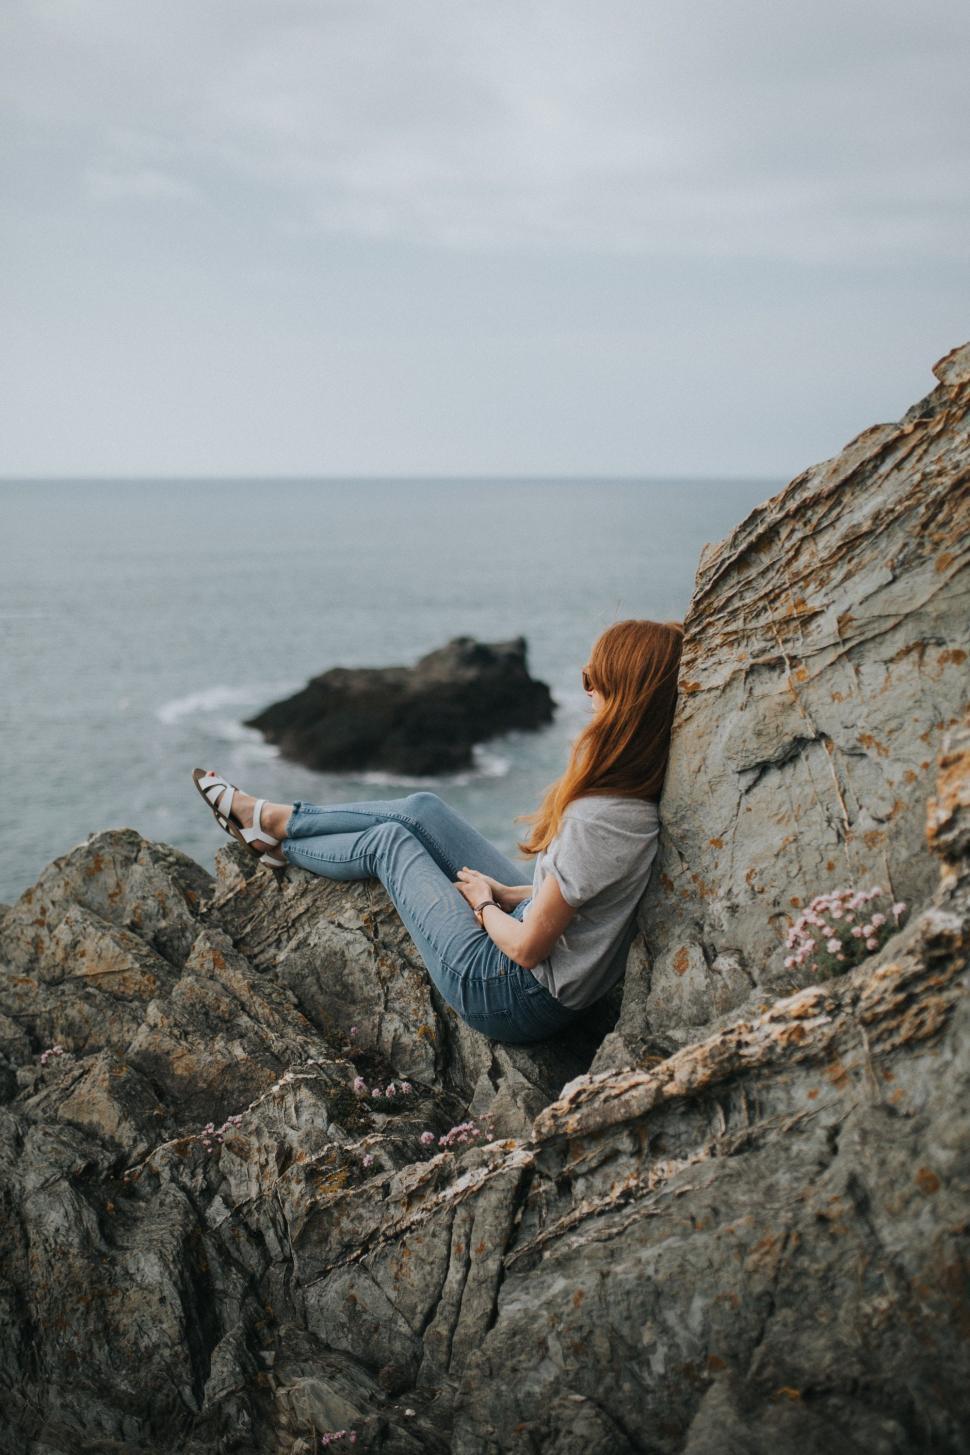 Free Image of Woman Sitting on Rock by Ocean 